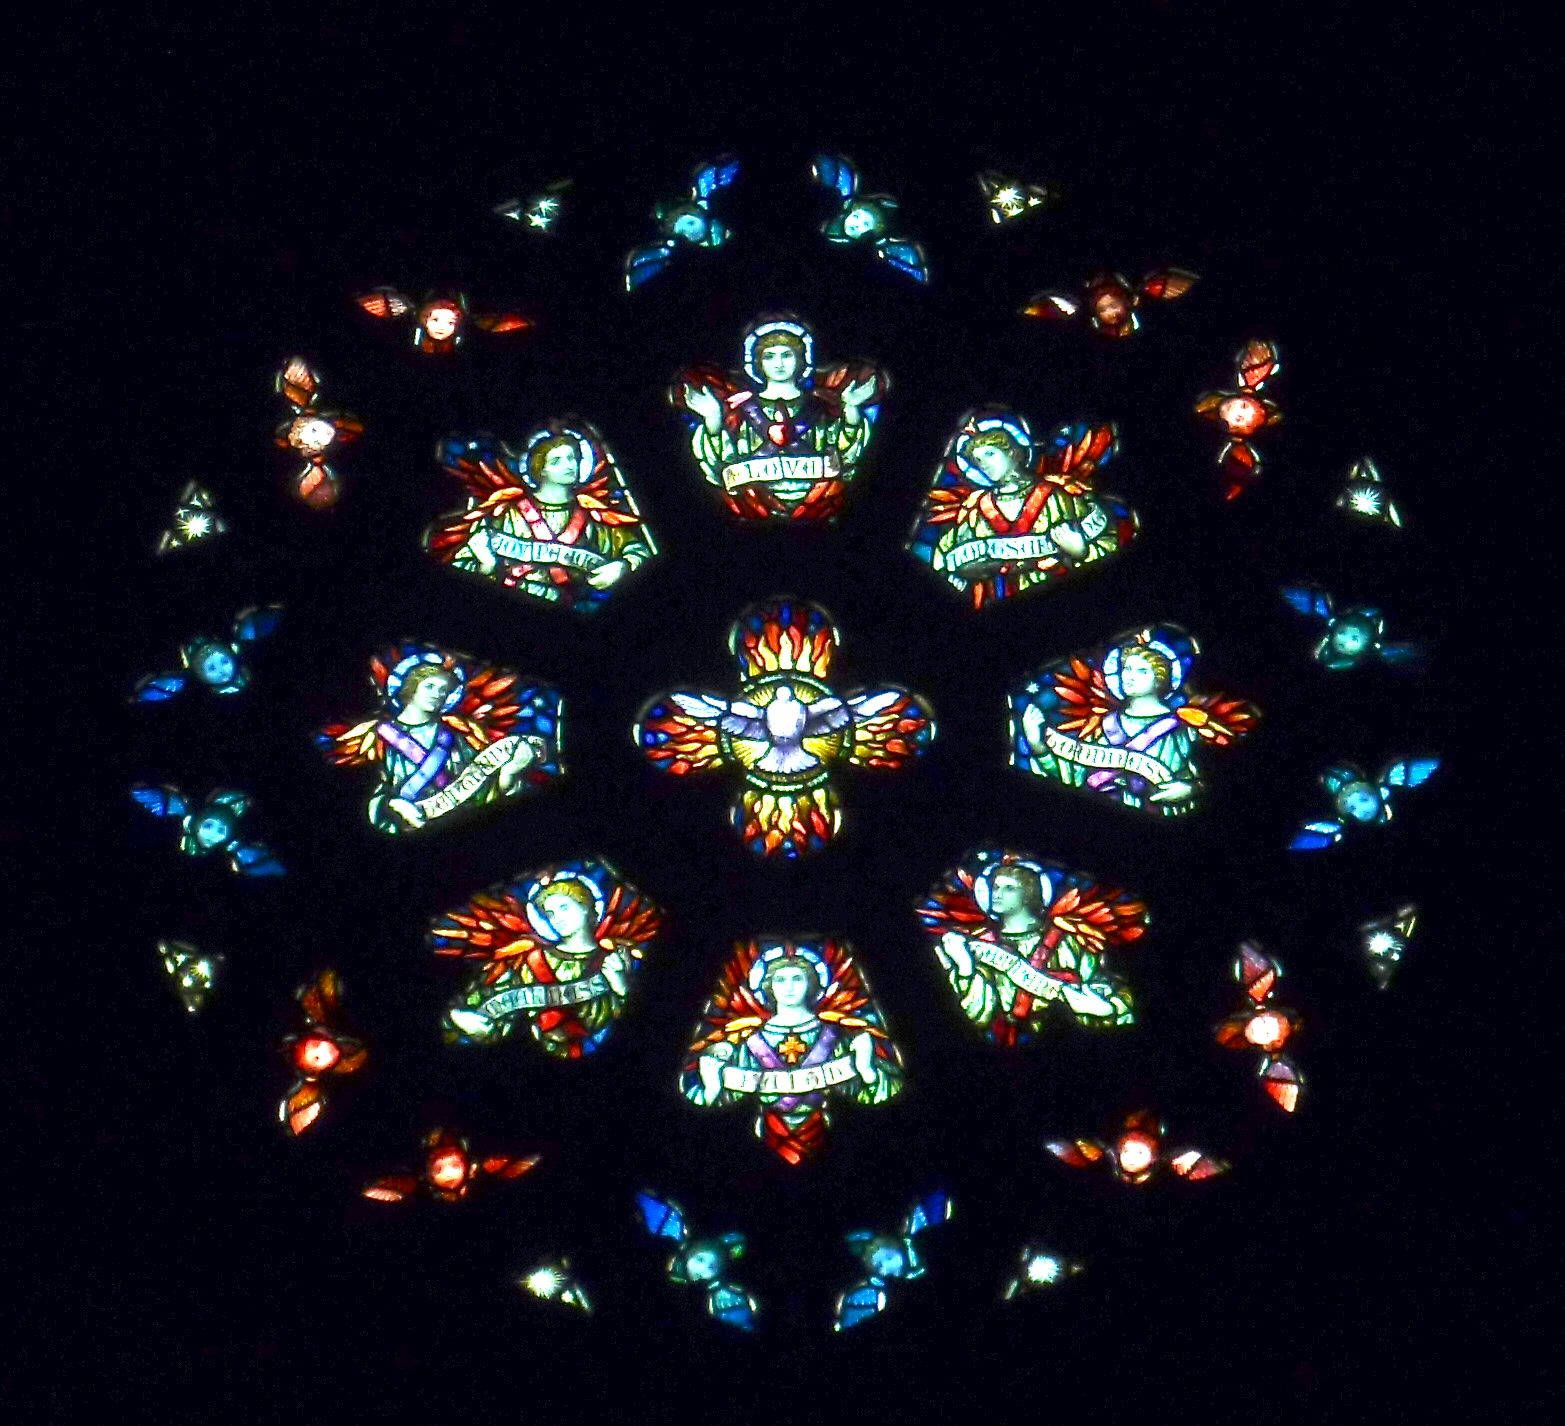 Rose Window, St Peter's Church, Staines